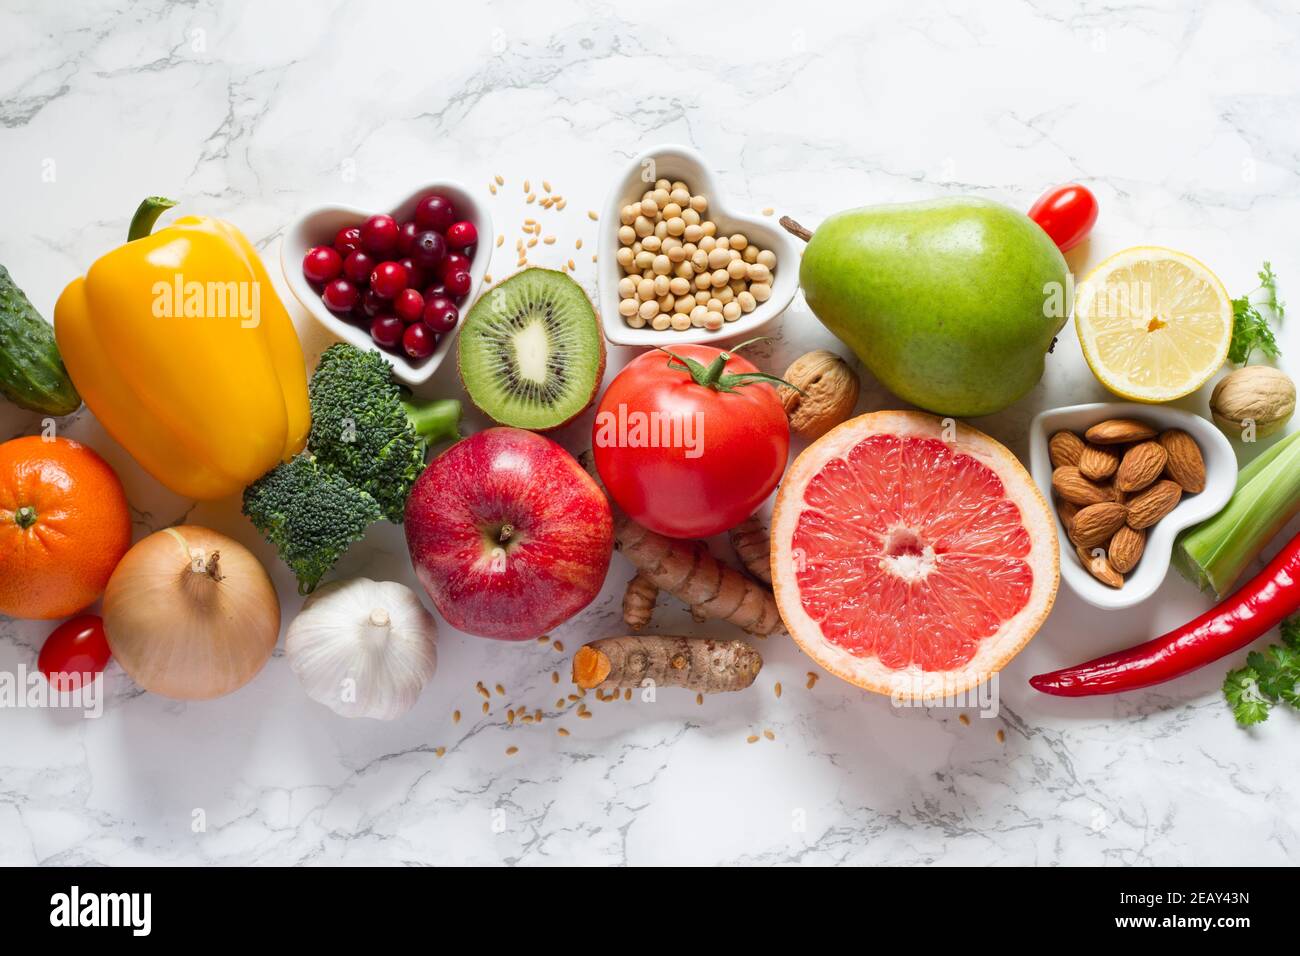 Healthy food selection: fruits, vegetables, seeds, nuts on light background Stock Photo